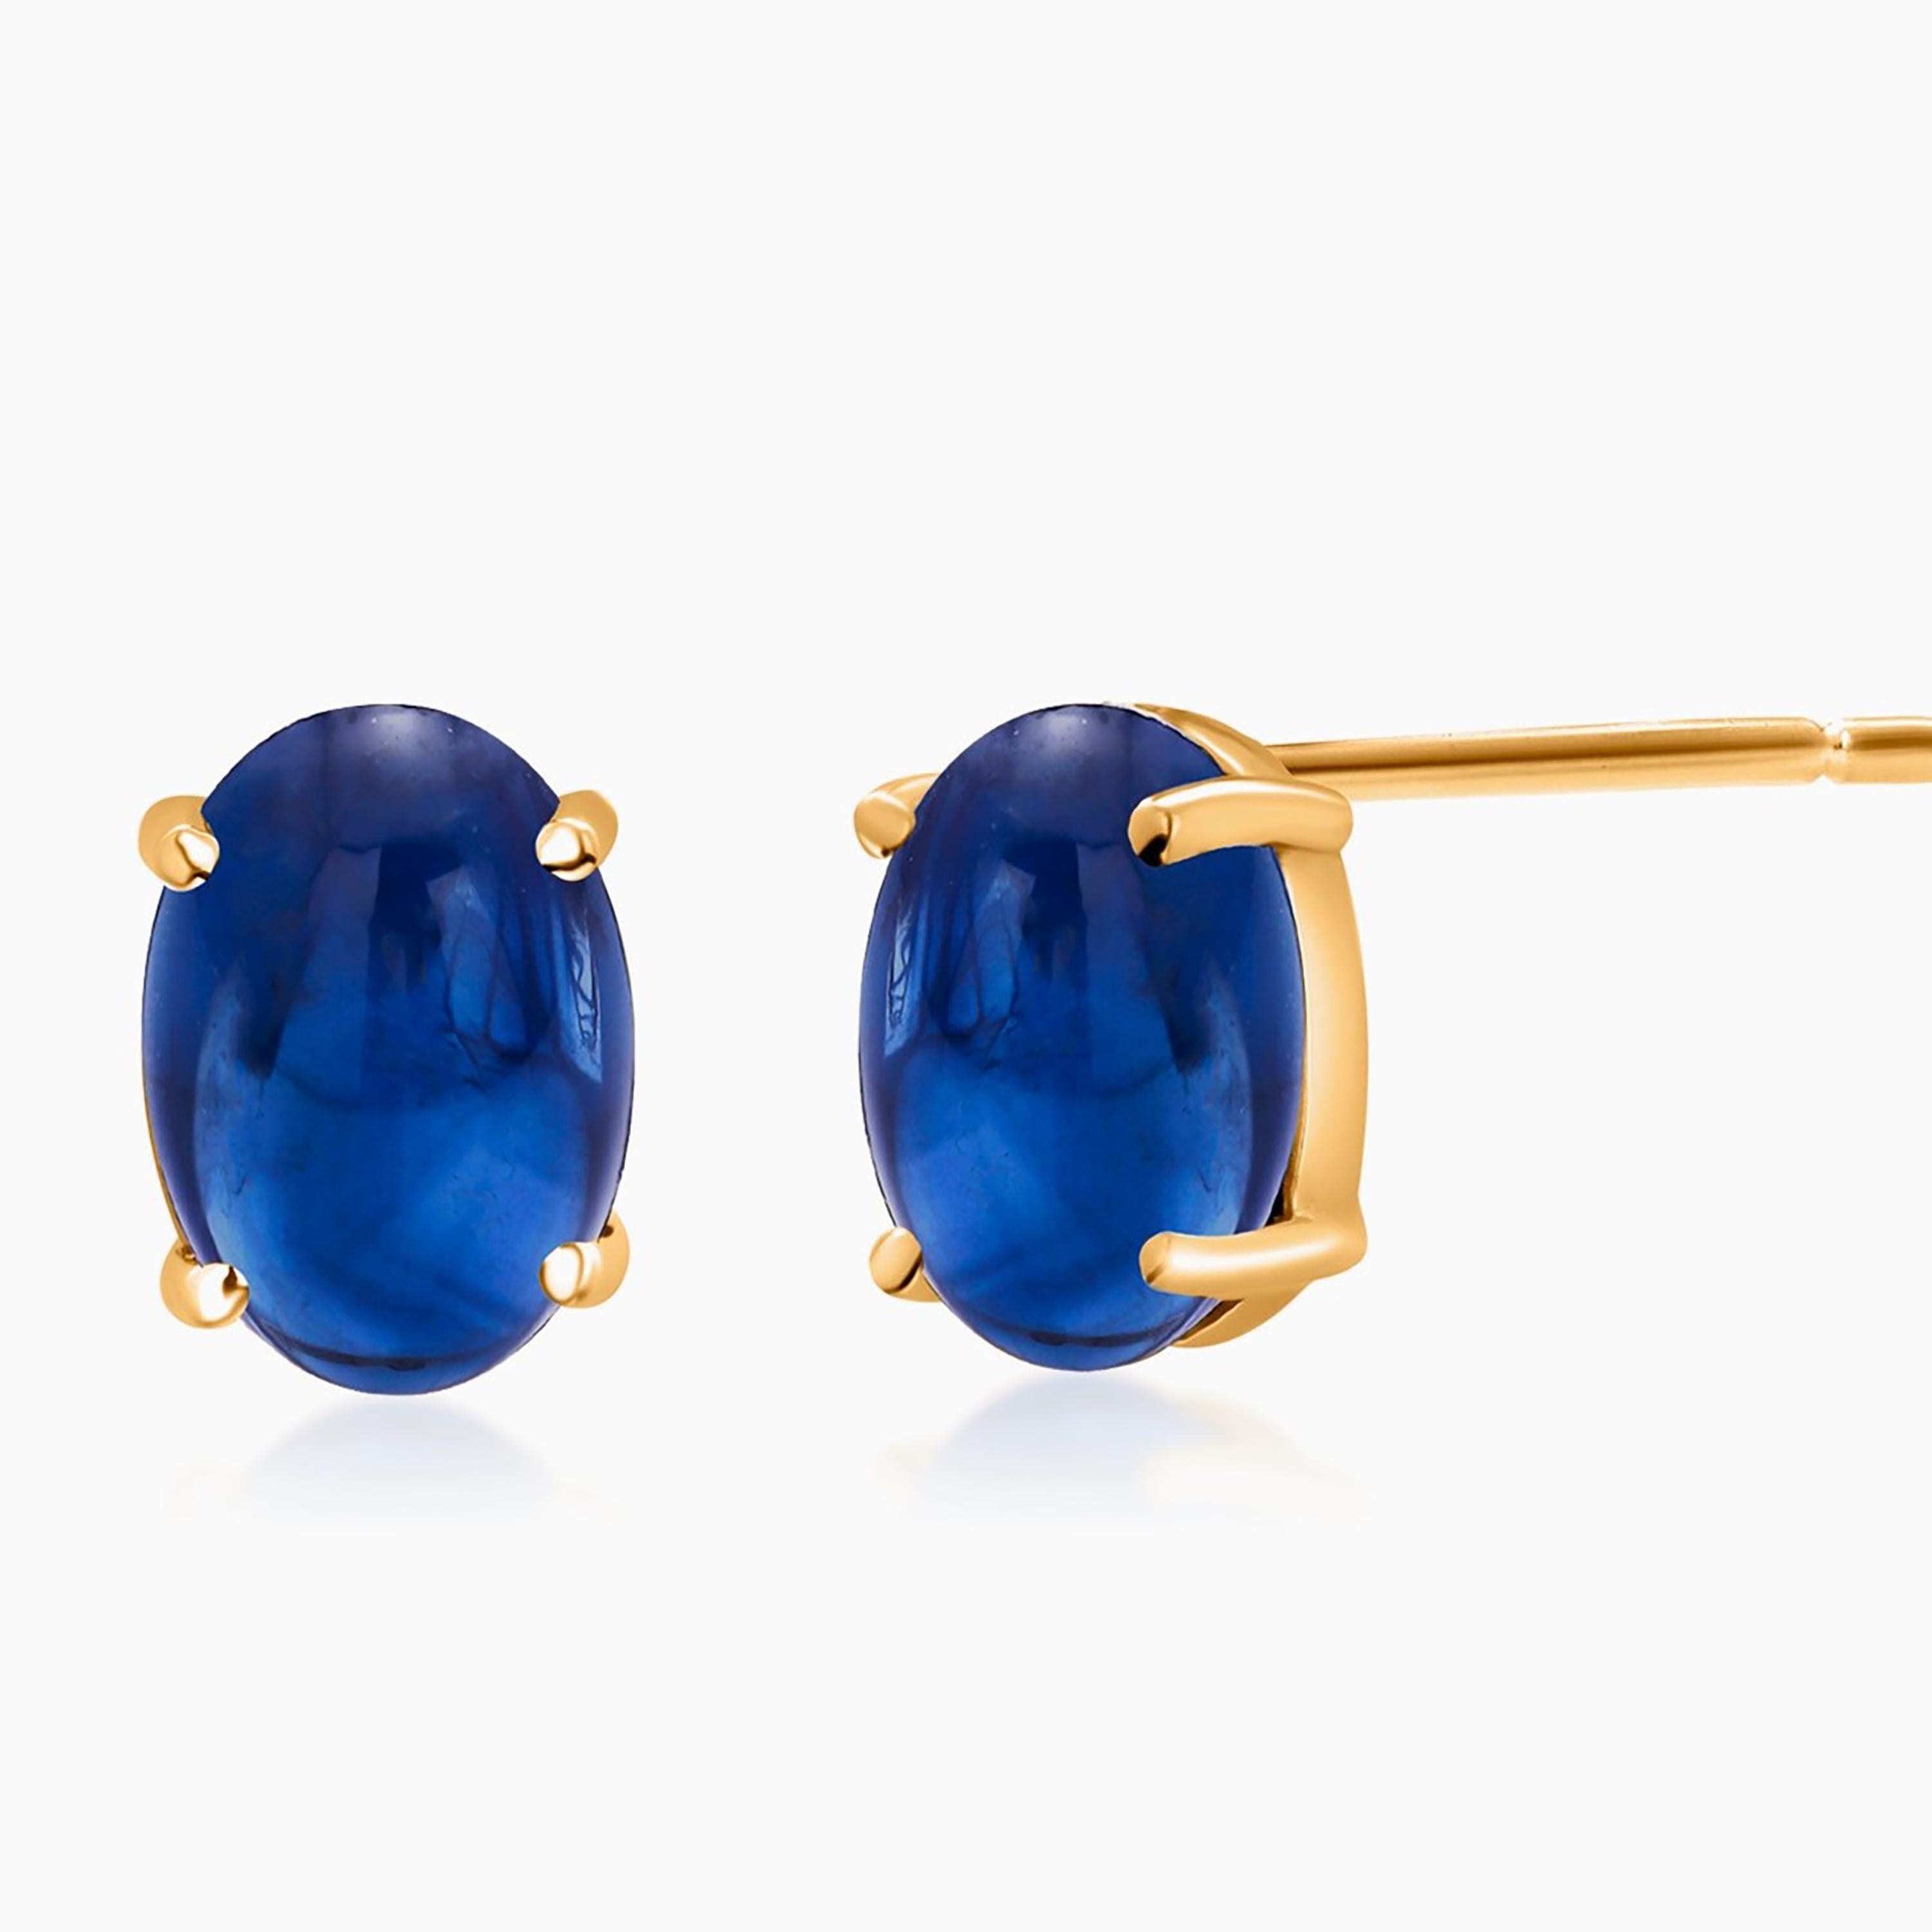 Matched Cabochon Sapphire 3.56 Carat 0.31 X 0.23 Inch Yellow Gold Stud Earrings In New Condition For Sale In New York, NY